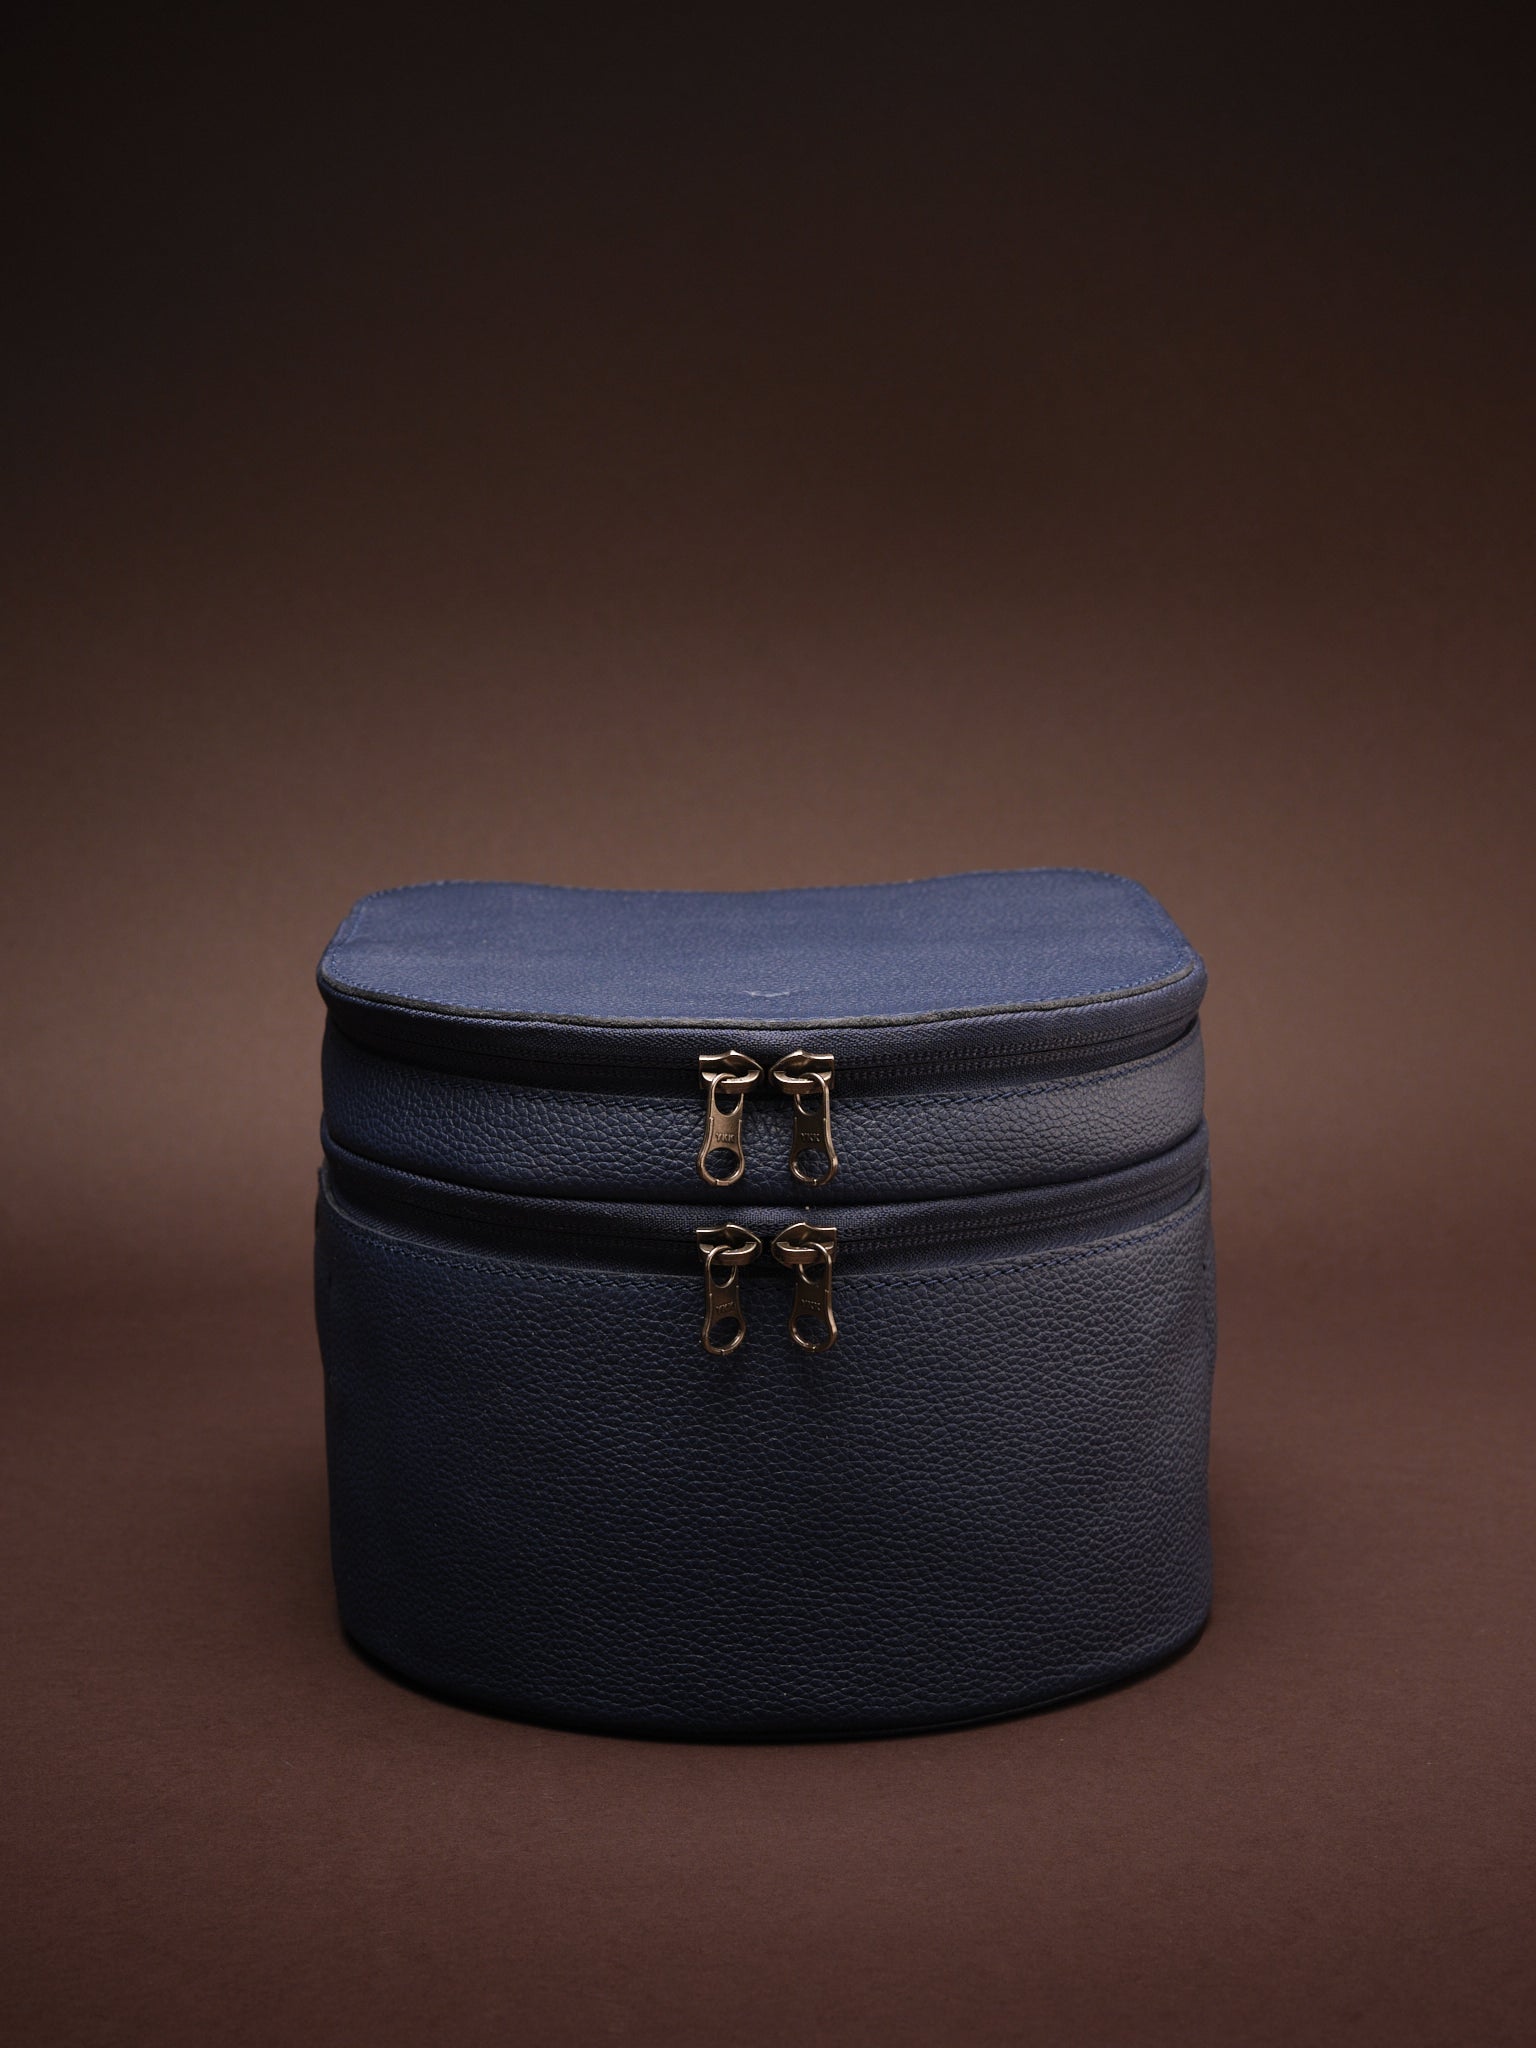 Leather Travel Case. VR Headset Case Navy by Capra Leather